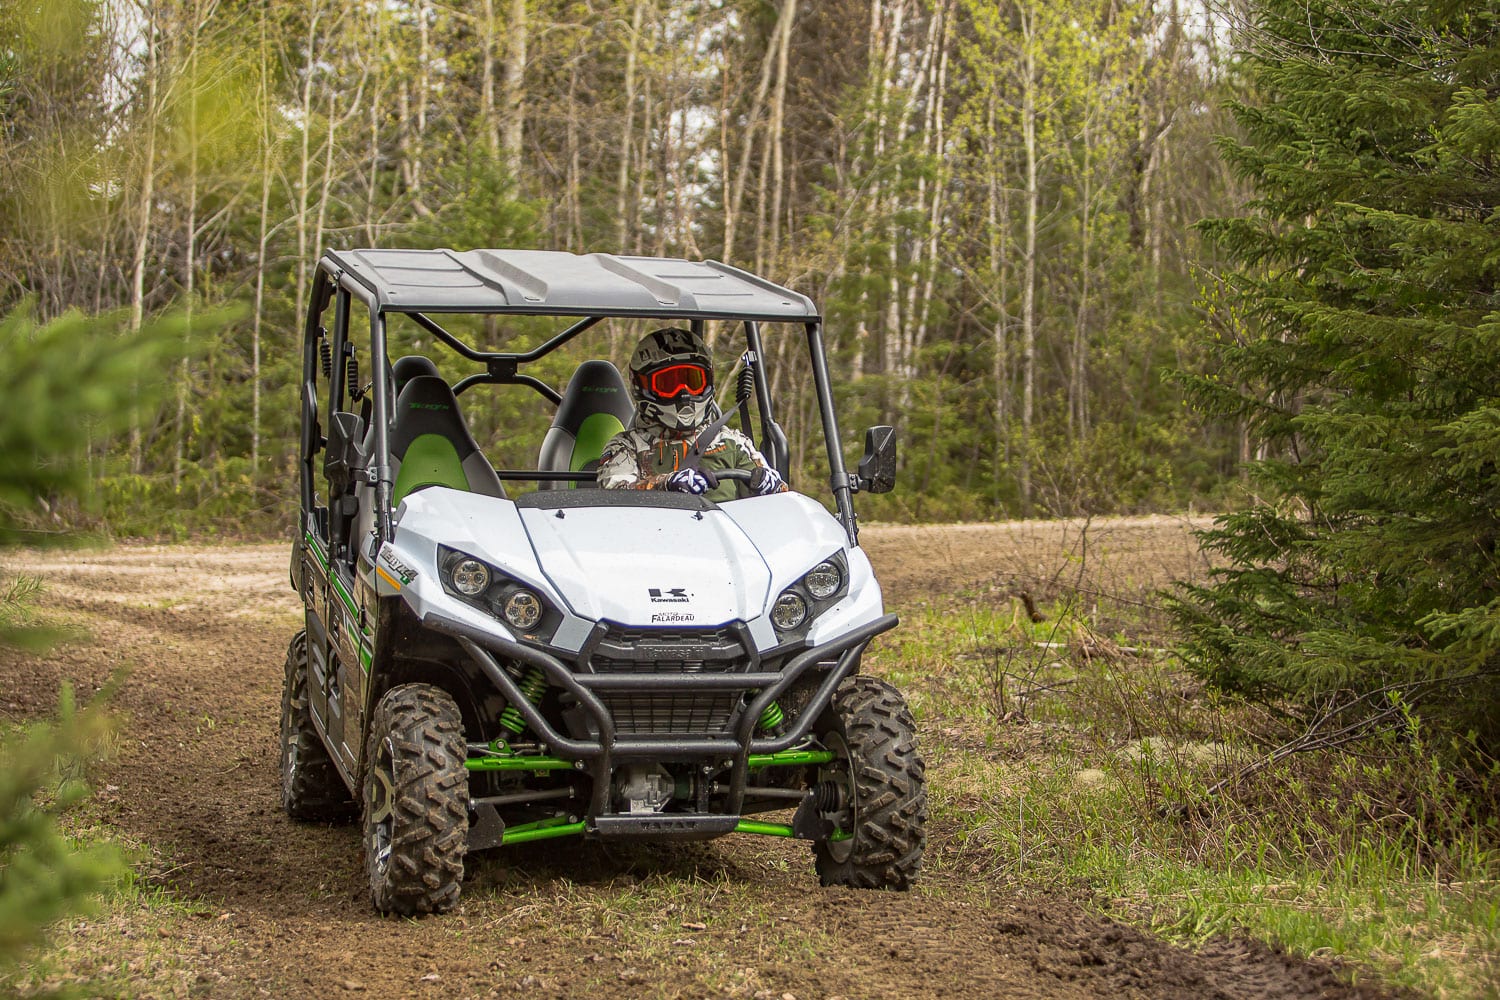 2018 The Most Innovative Year For ATVs And UTVs